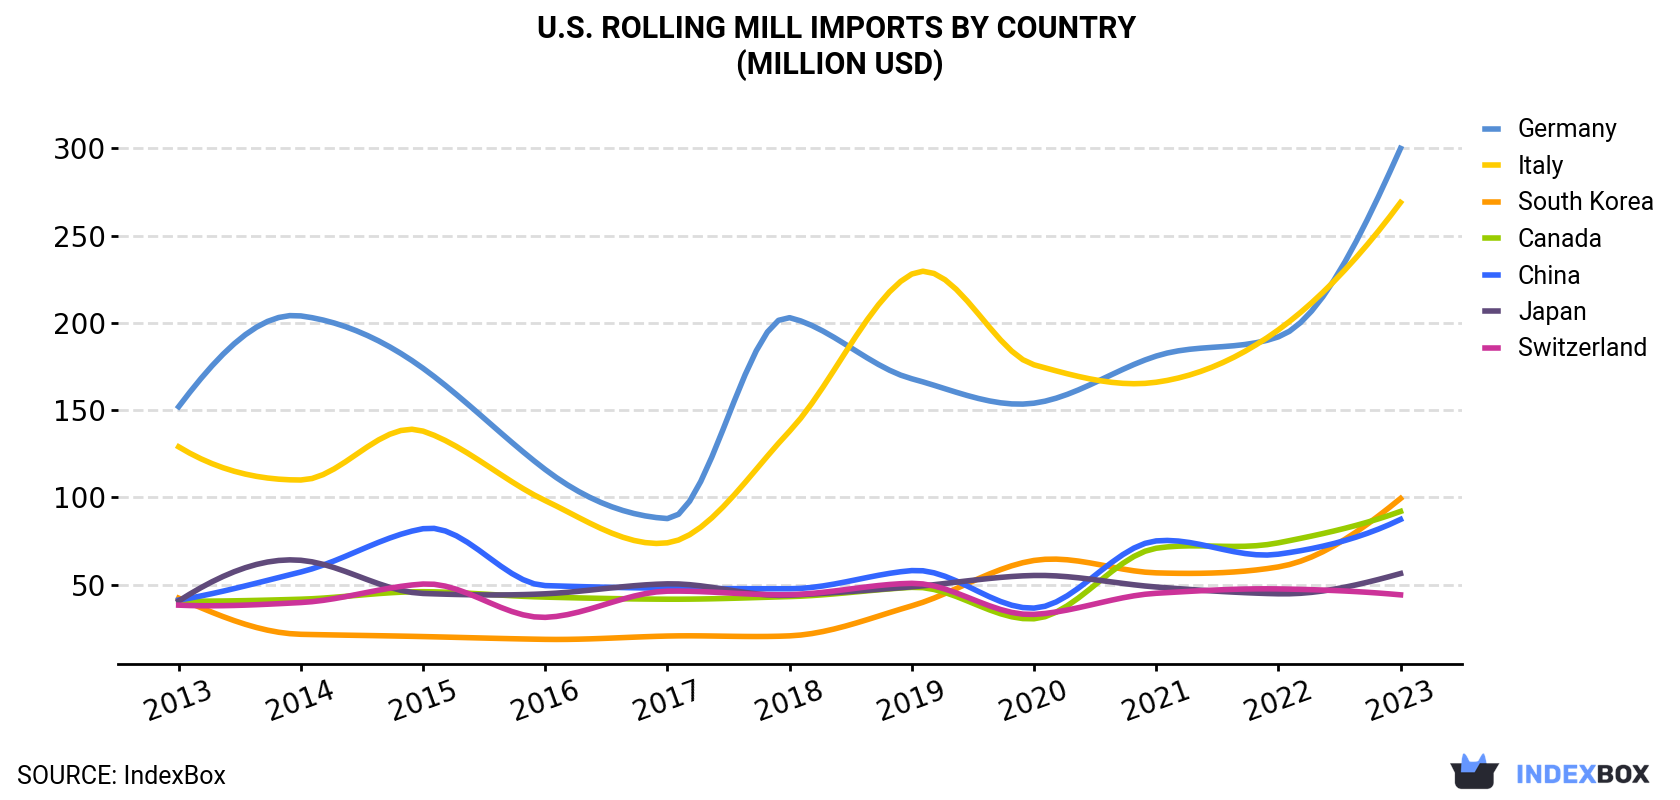 U.S. Rolling Mill Imports By Country (Million USD)